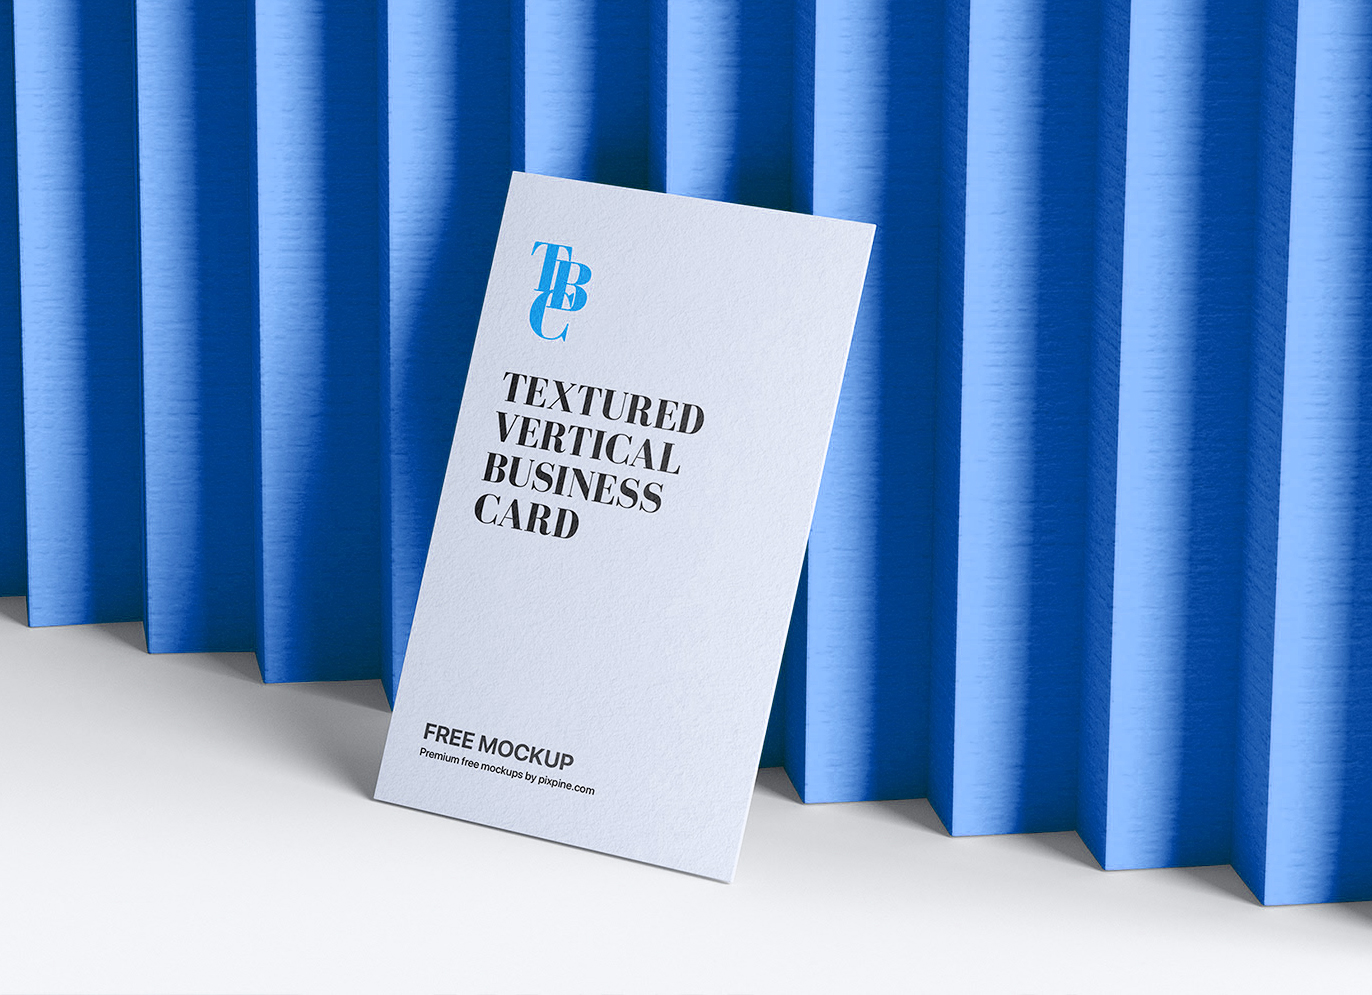 Textured Vertical Business Card Mockup